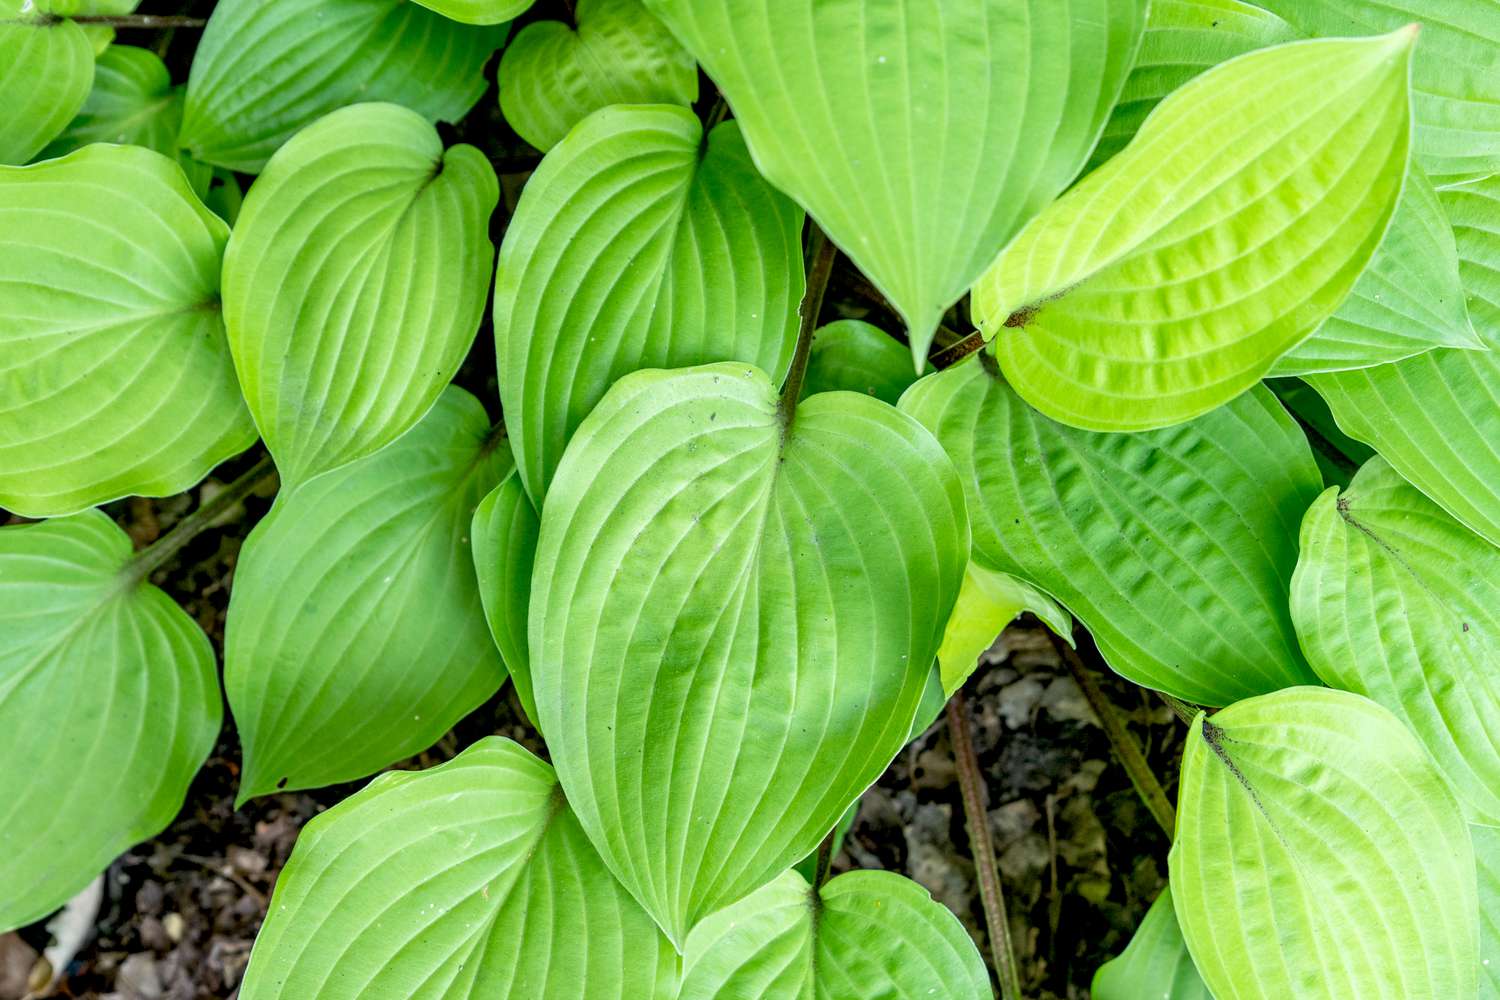 Fire island hosta plant with bright green and yellow-green ribbed leaves closeup